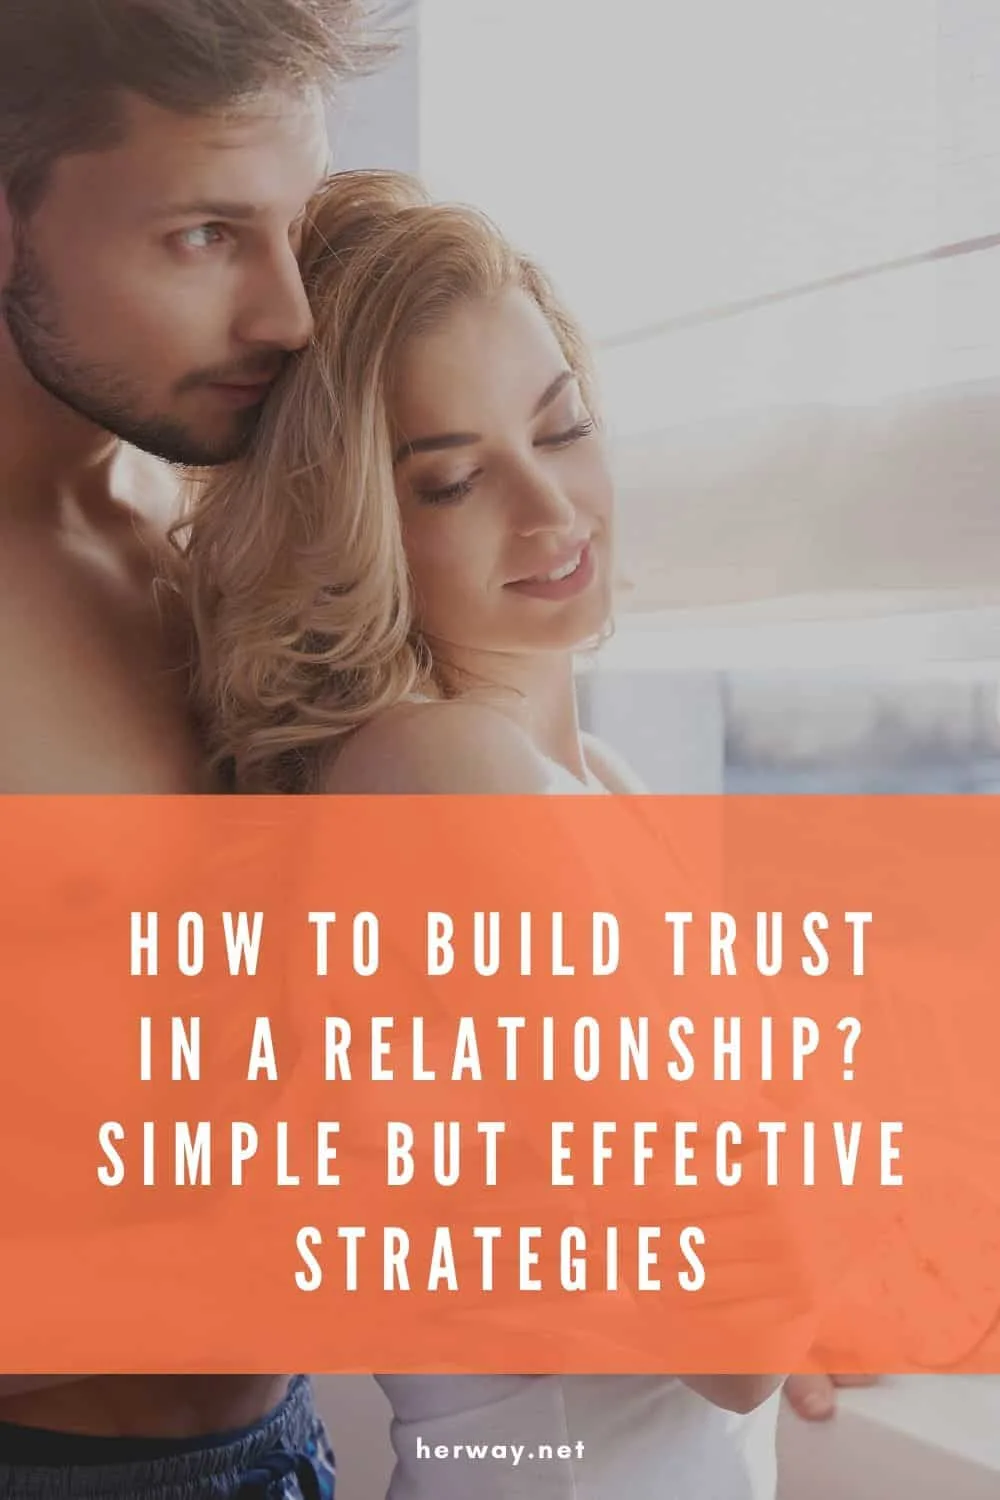 How To Build Trust In A Relationship? Simple But Effective Strategies